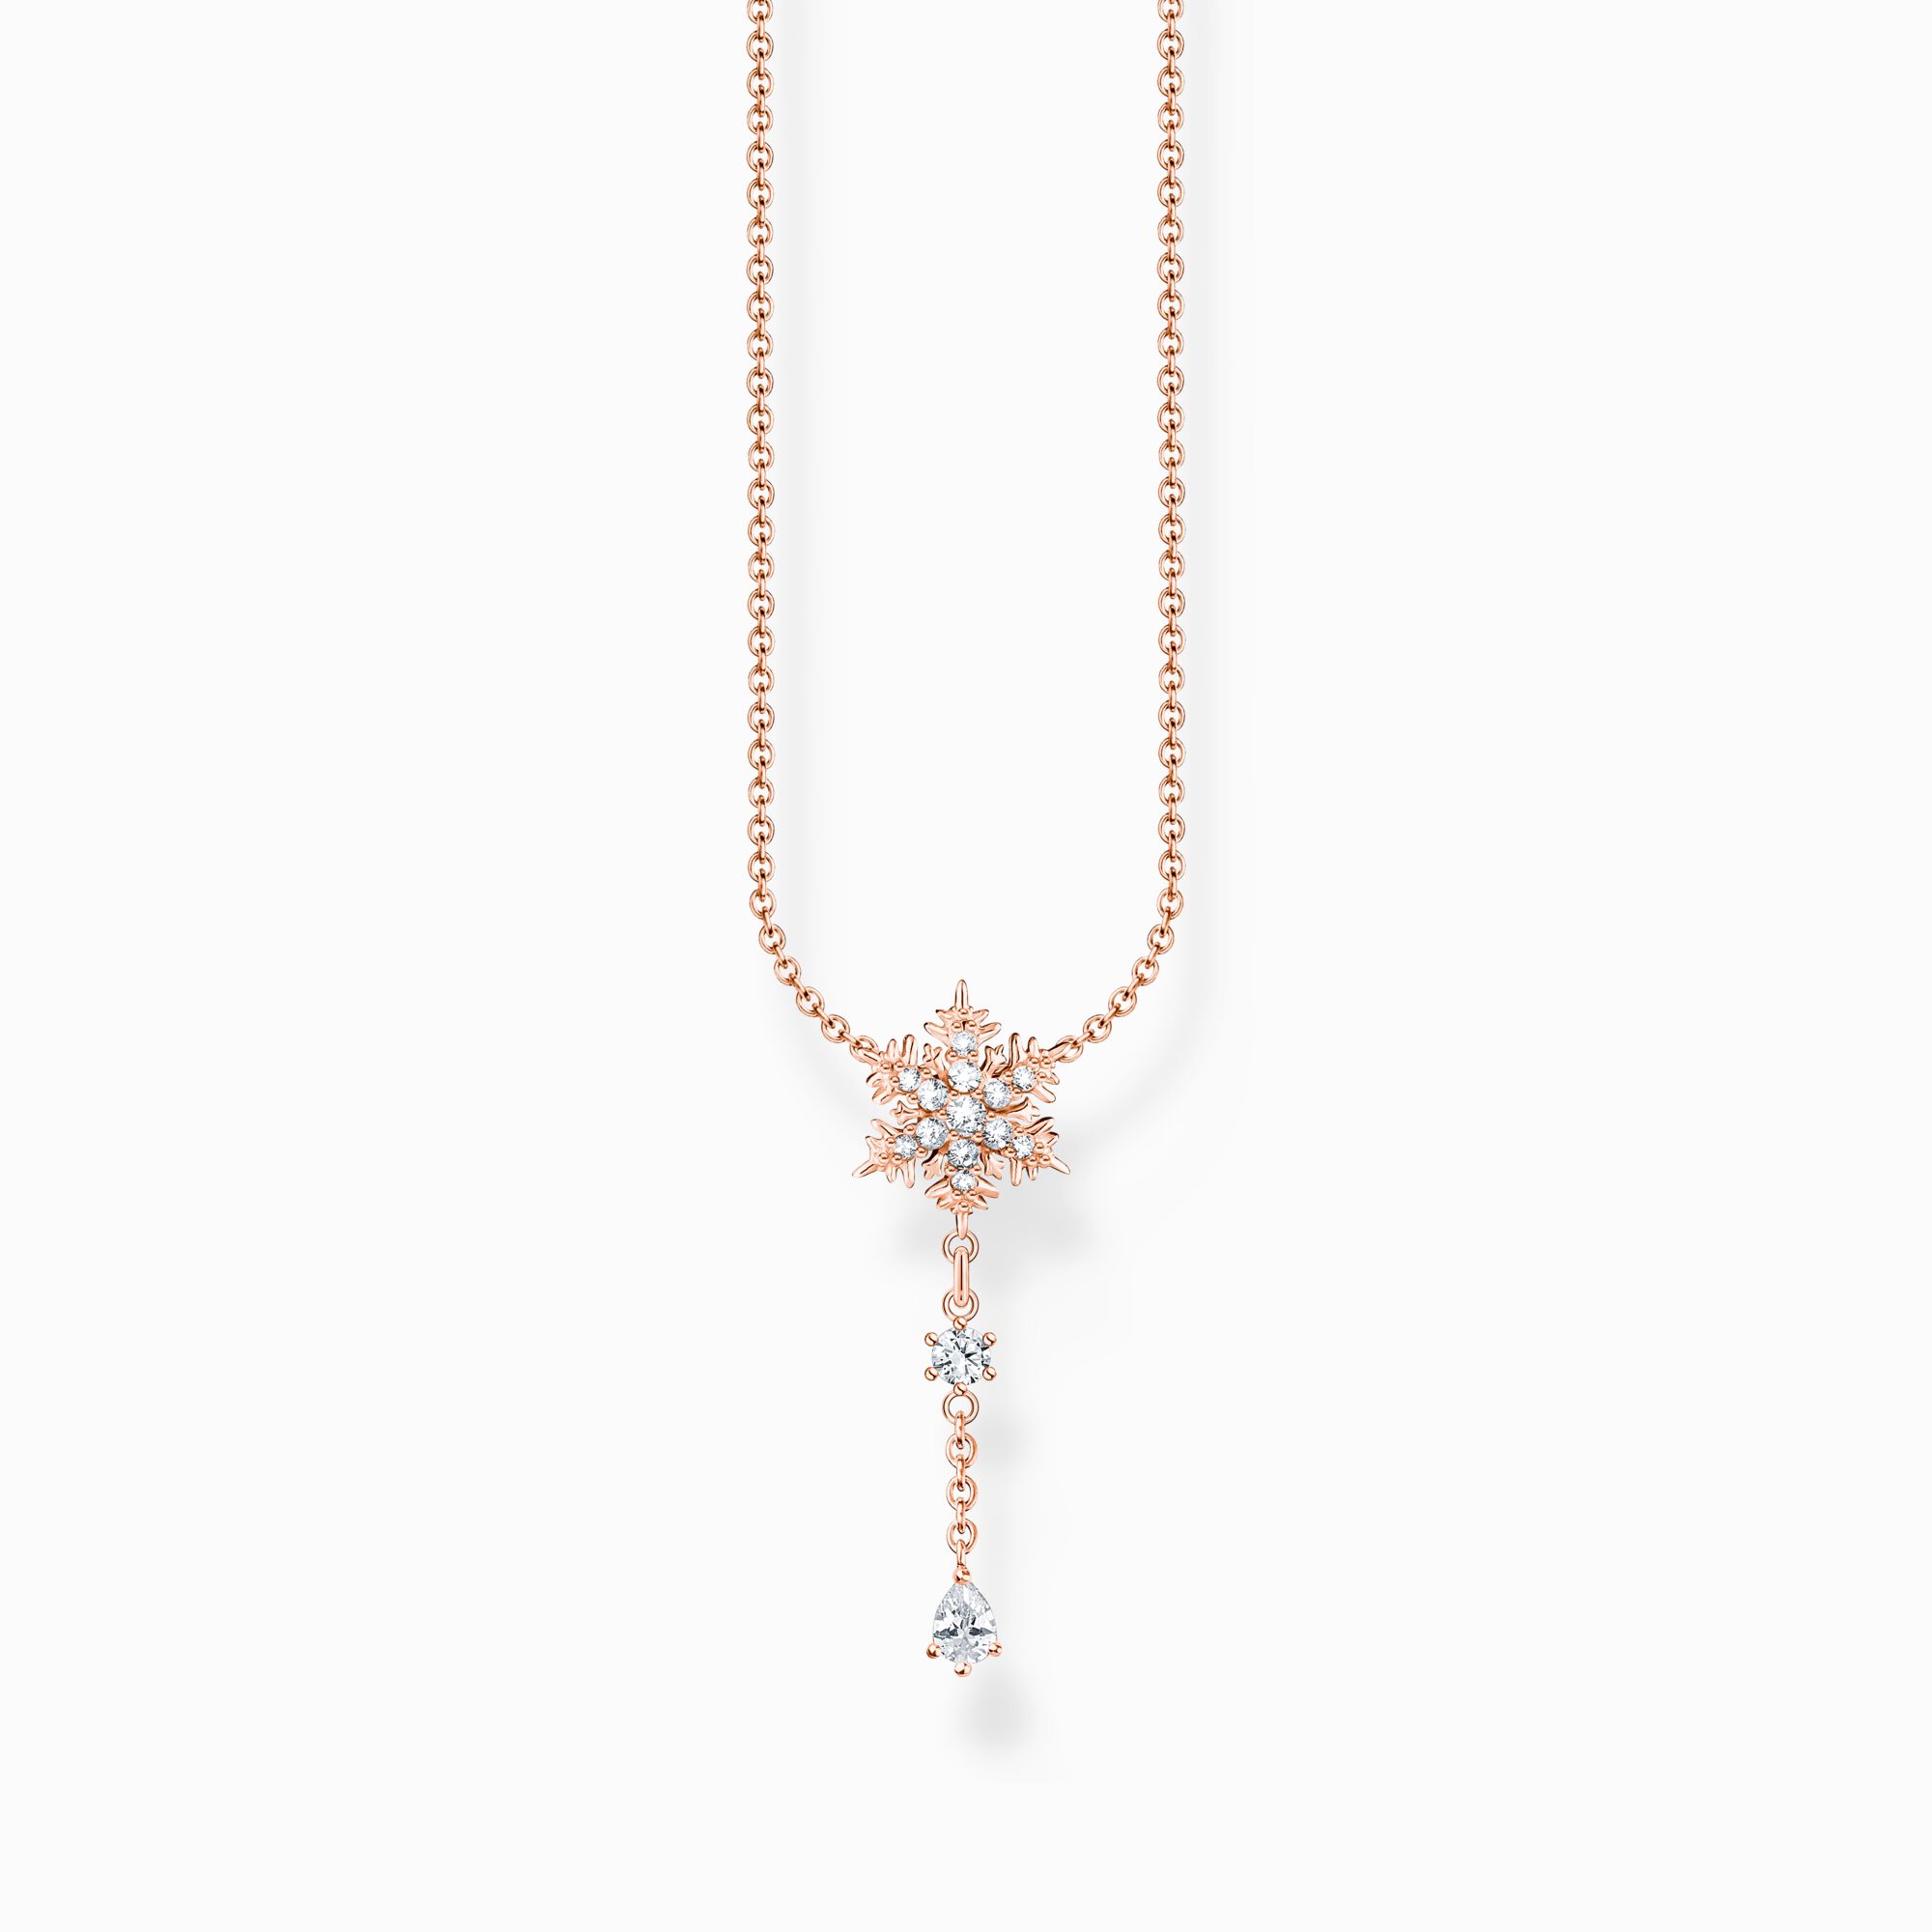 Necklace snowflake with white stones rose gold from the Charming Collection collection in the THOMAS SABO online store